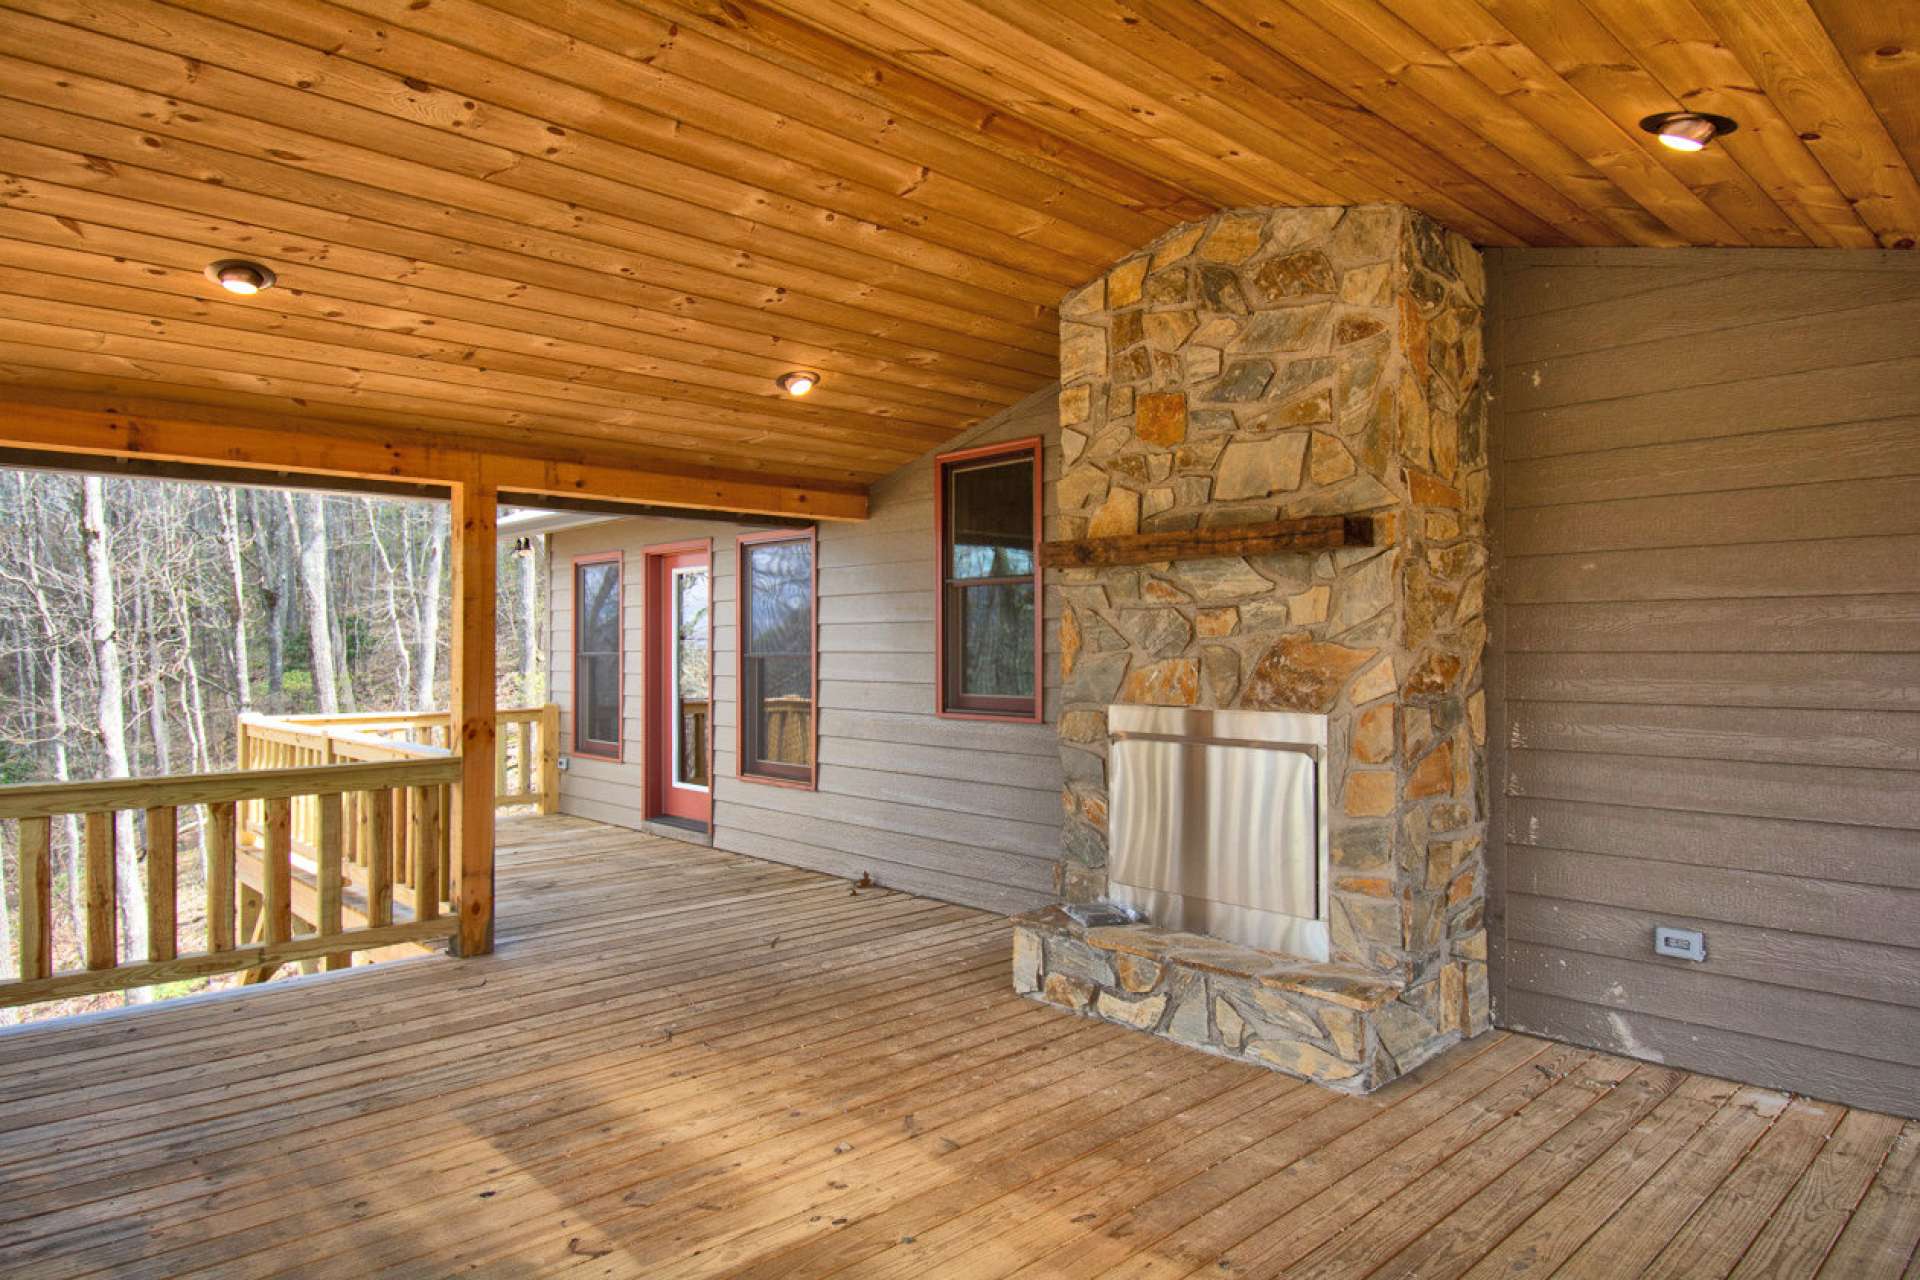 Entertain guests on the expansive covered side porch with a fireplace.